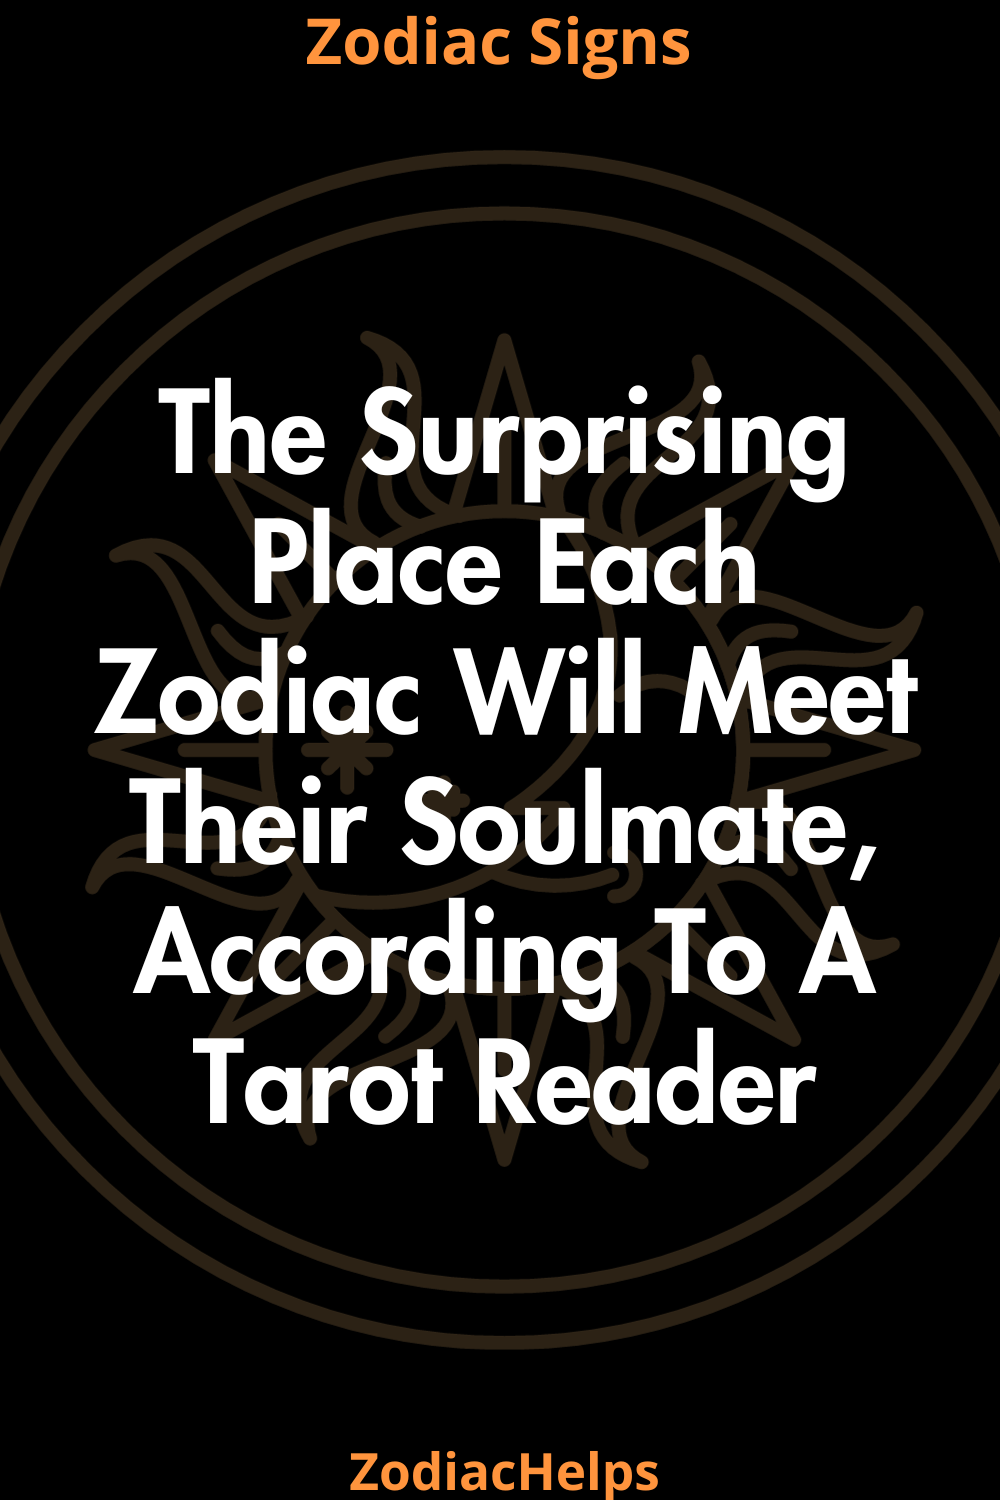 The Surprising Place Each Zodiac Will Meet Their Soulmate, According To A Tarot Reader